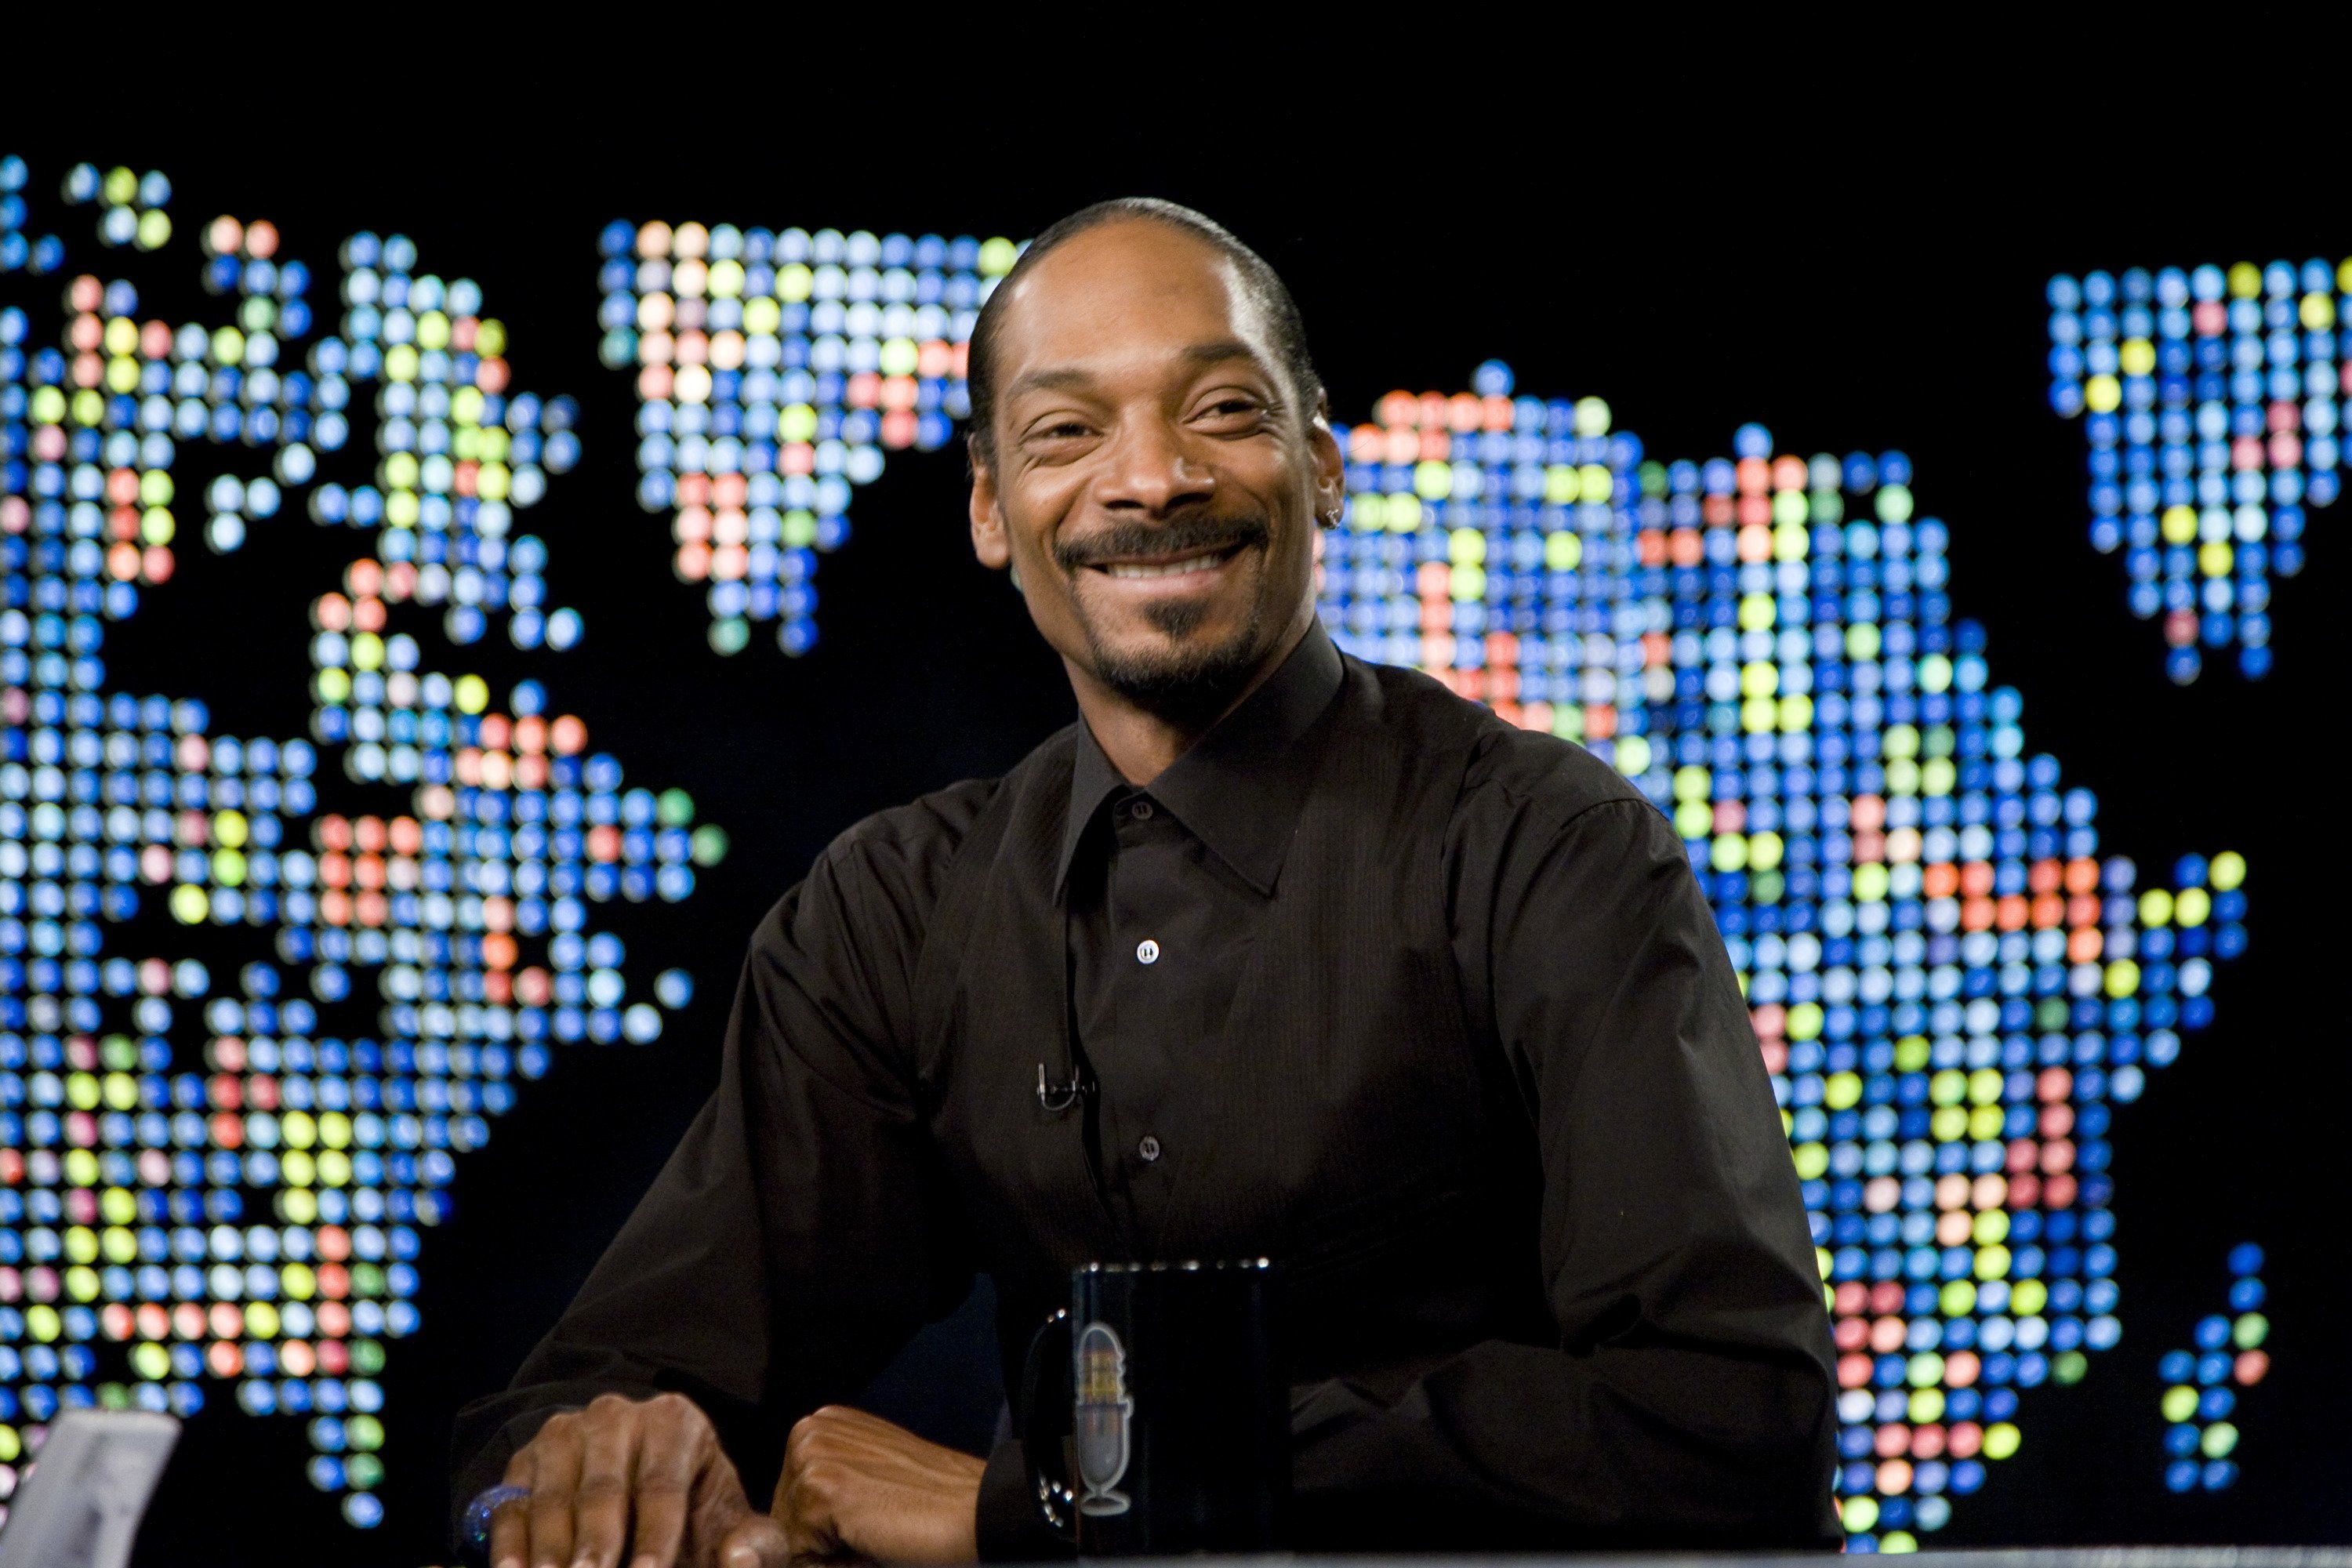 Rapper and actor Snoop Dogg appears on CNN's "Larry King Live" on January 28, 2008.